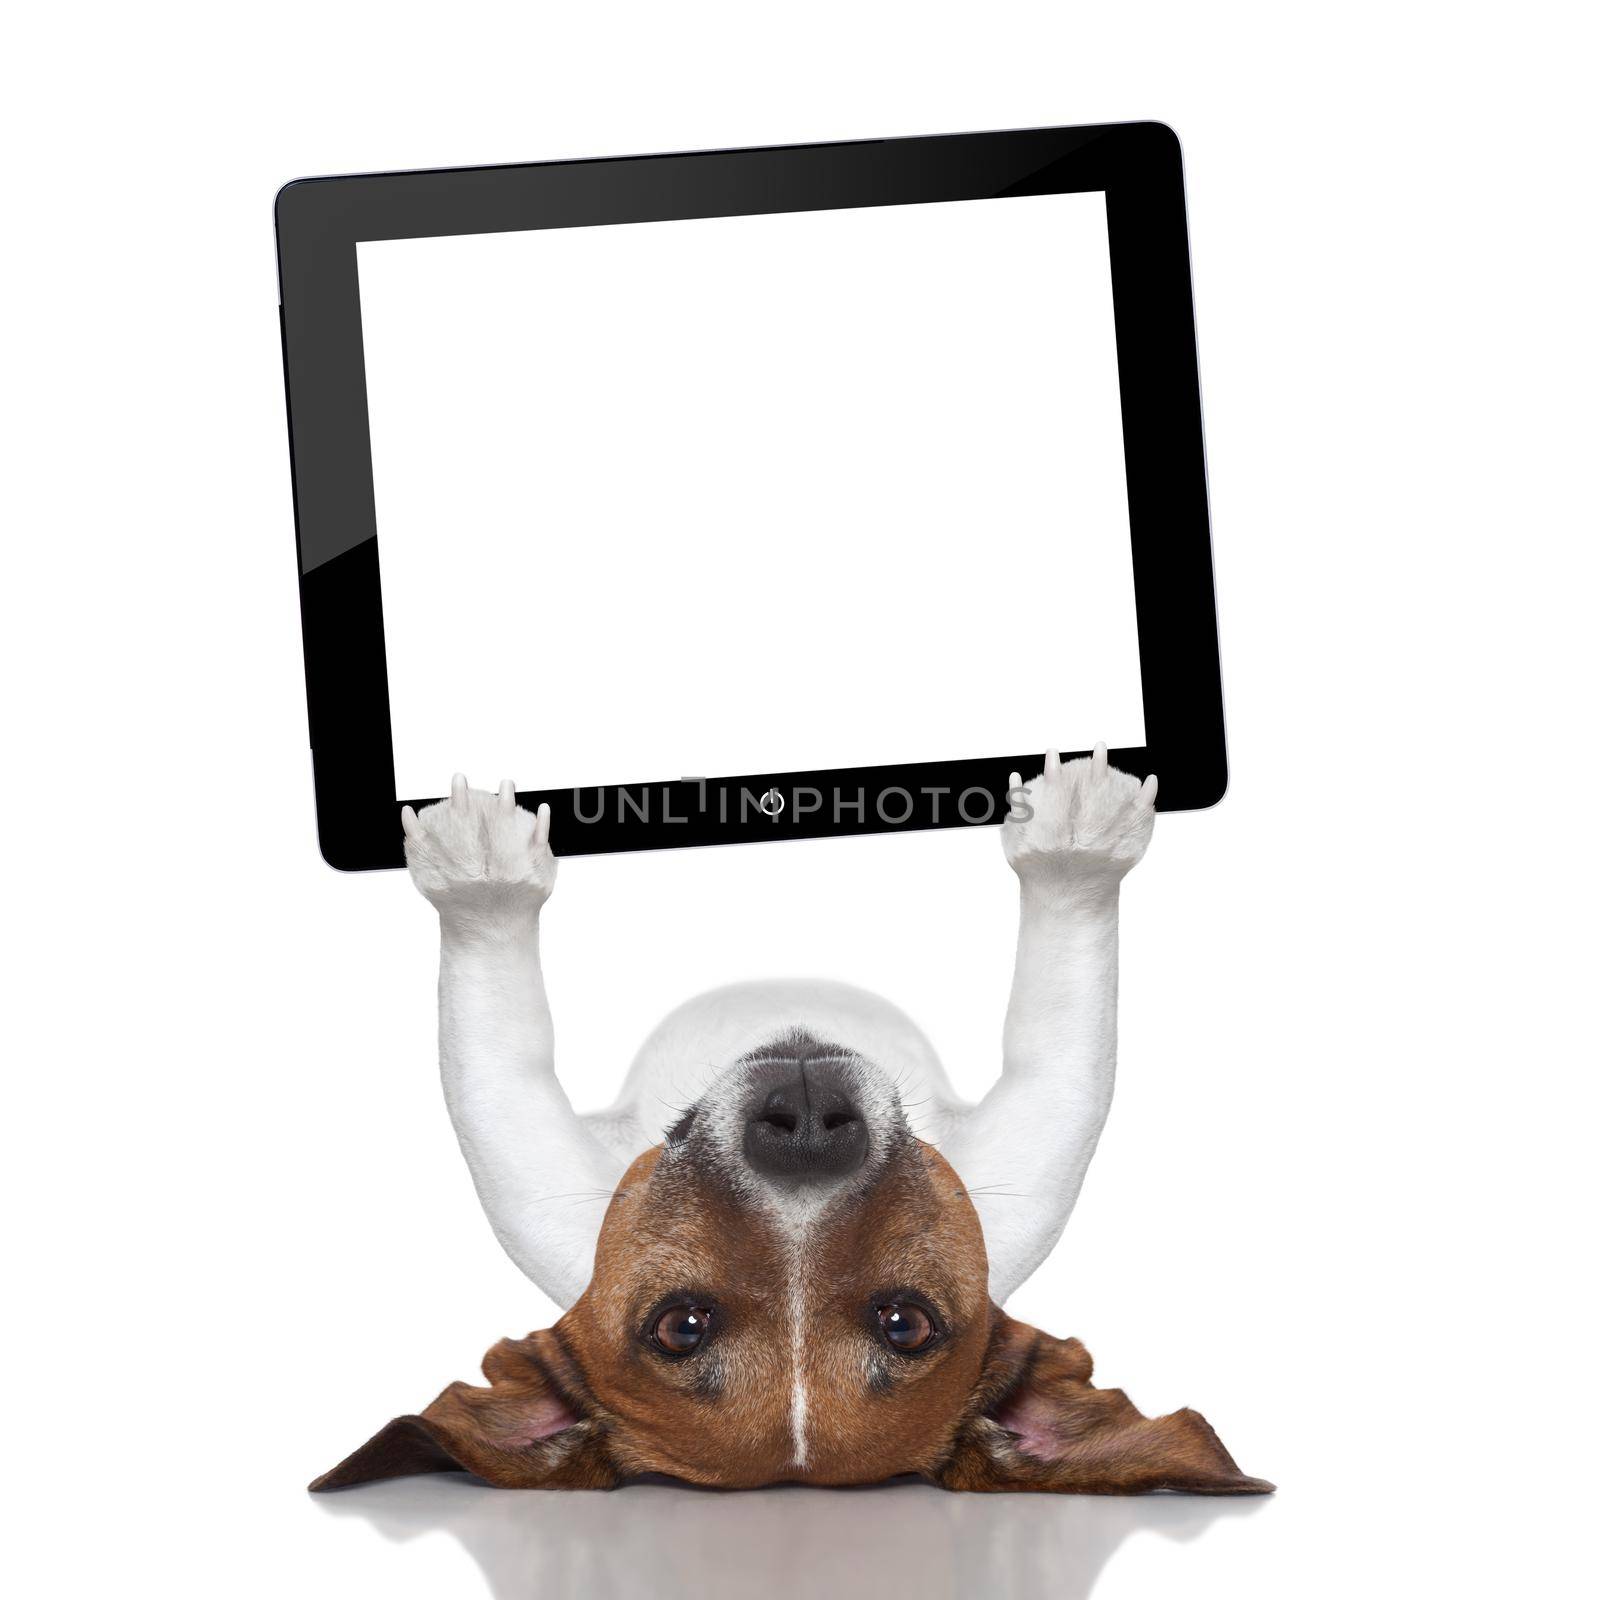 dog holding a tablet pc lying upside down